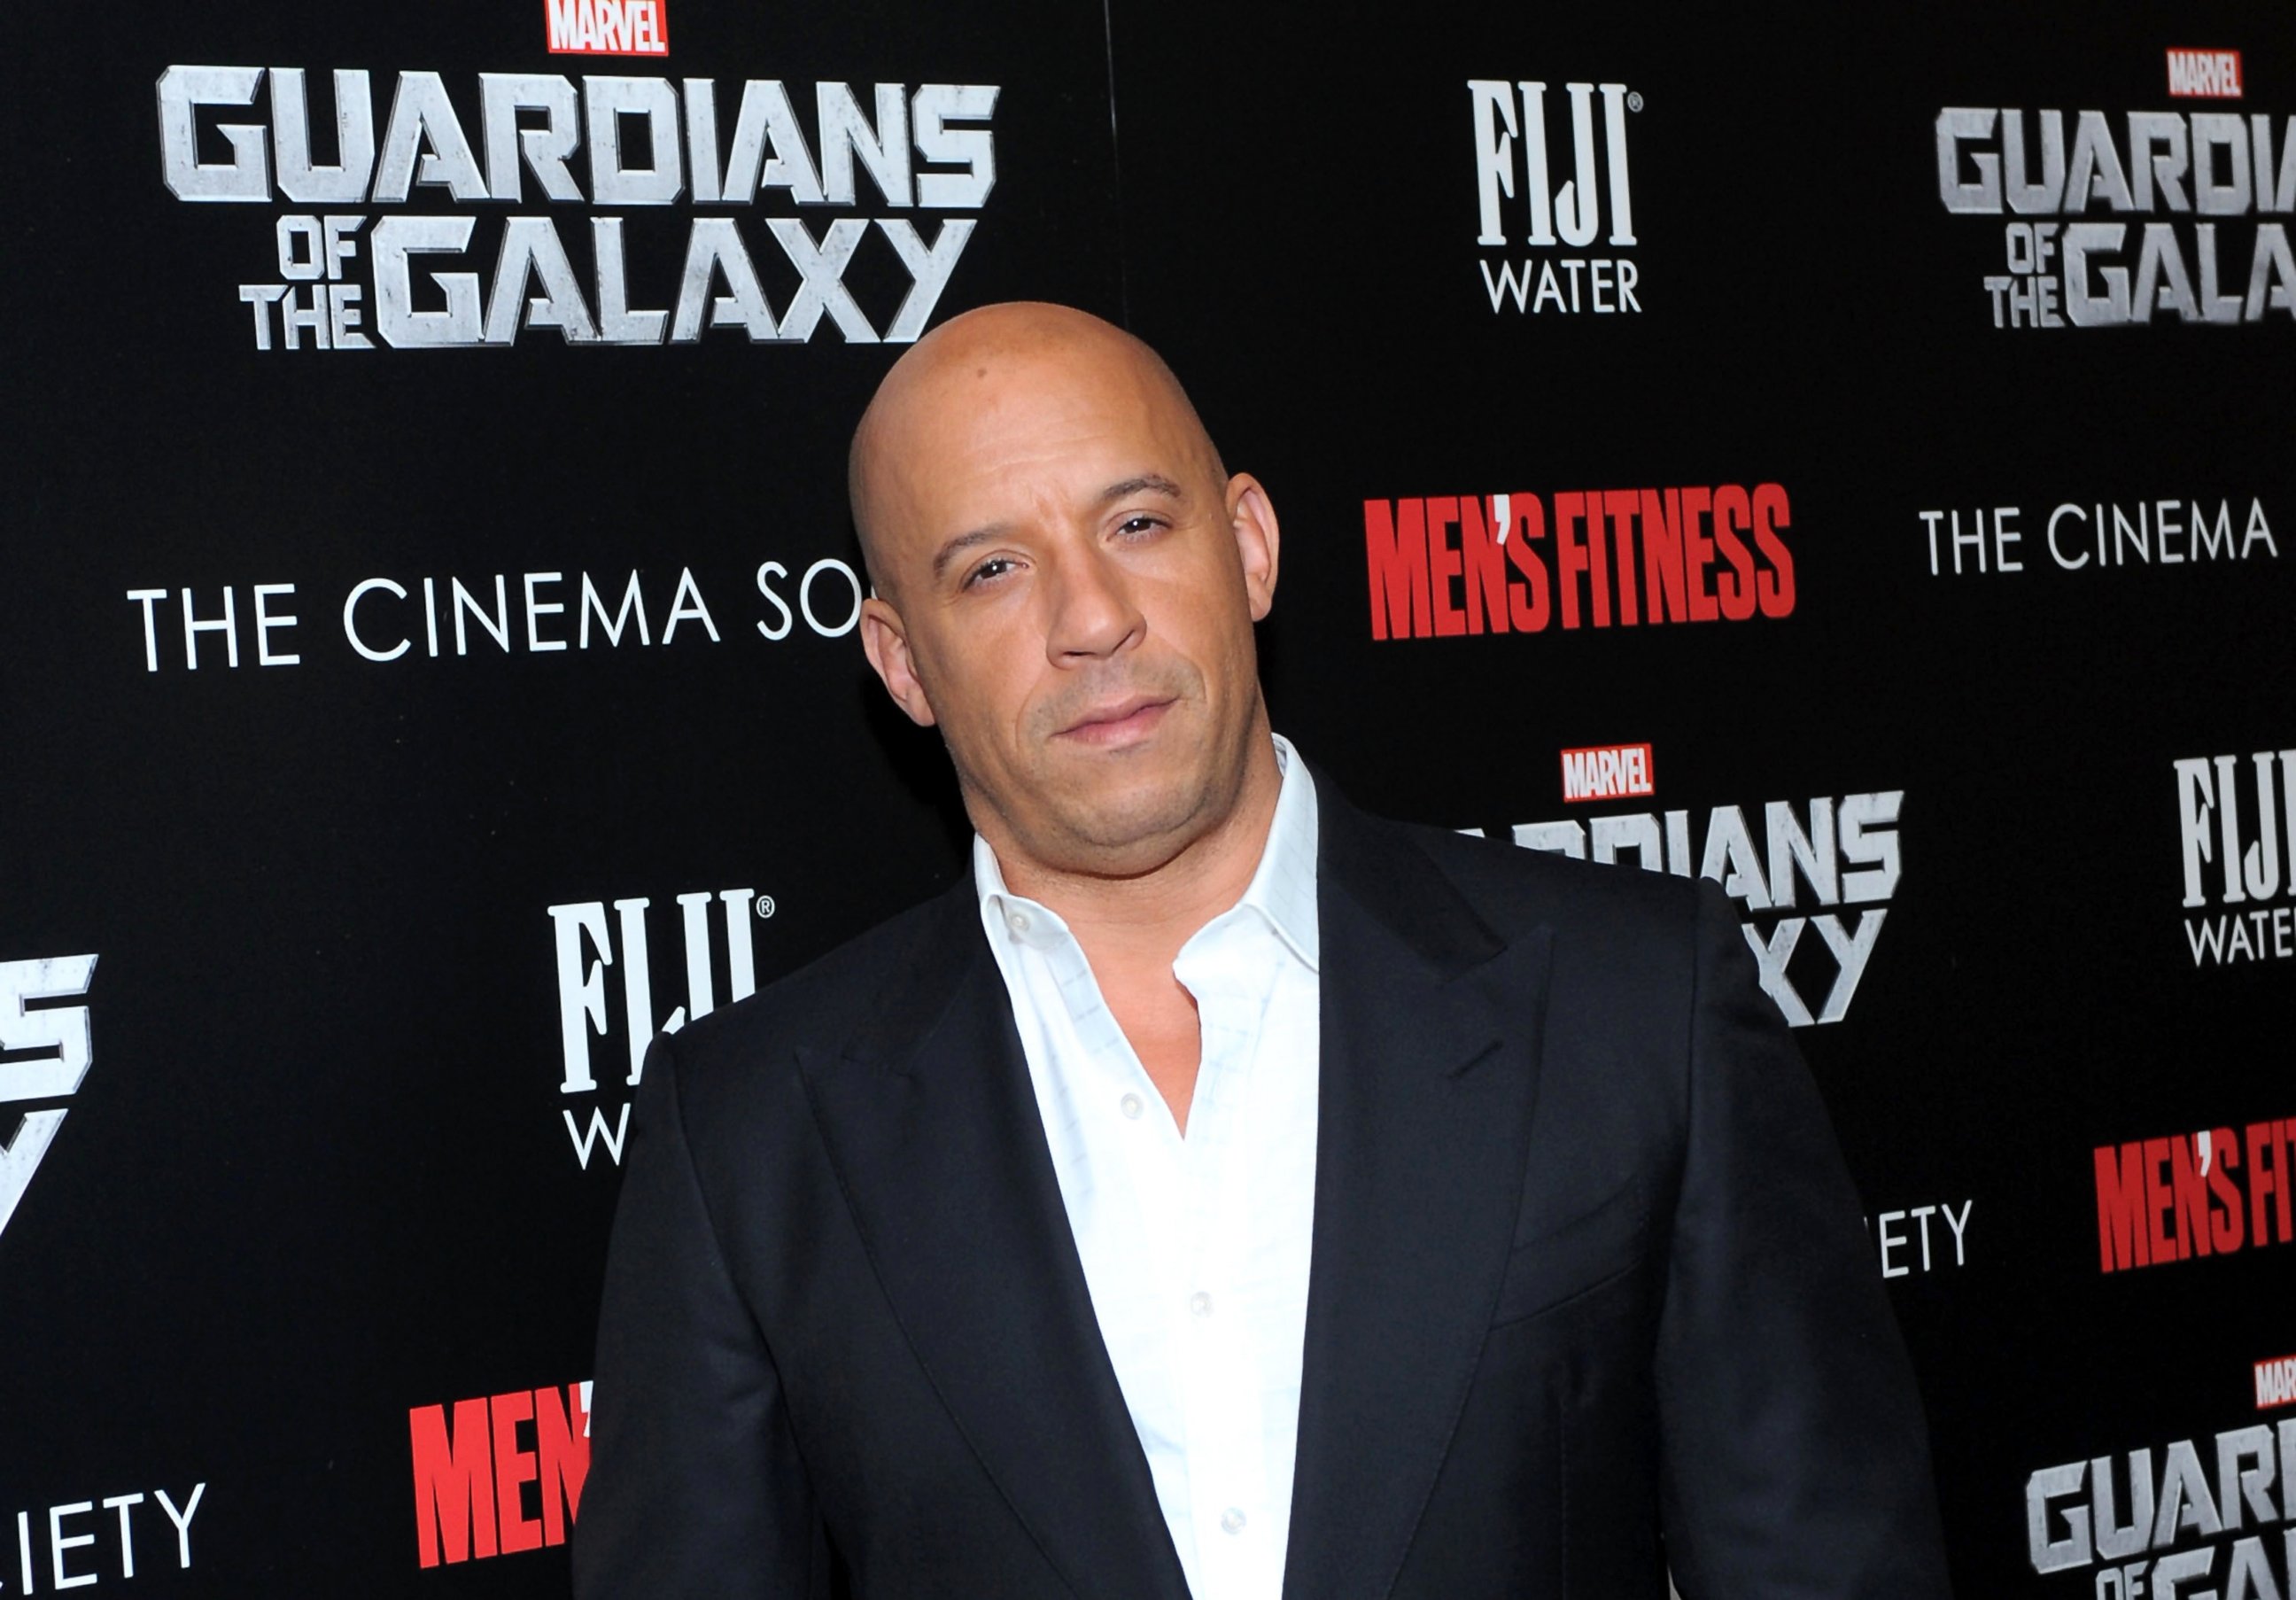 PHOTO: Vin Diesel attends The Cinema Society with Men's Fitness & FIJI Water host a screening of "Guardians of the Galaxy," July 29, 2014, in New York.